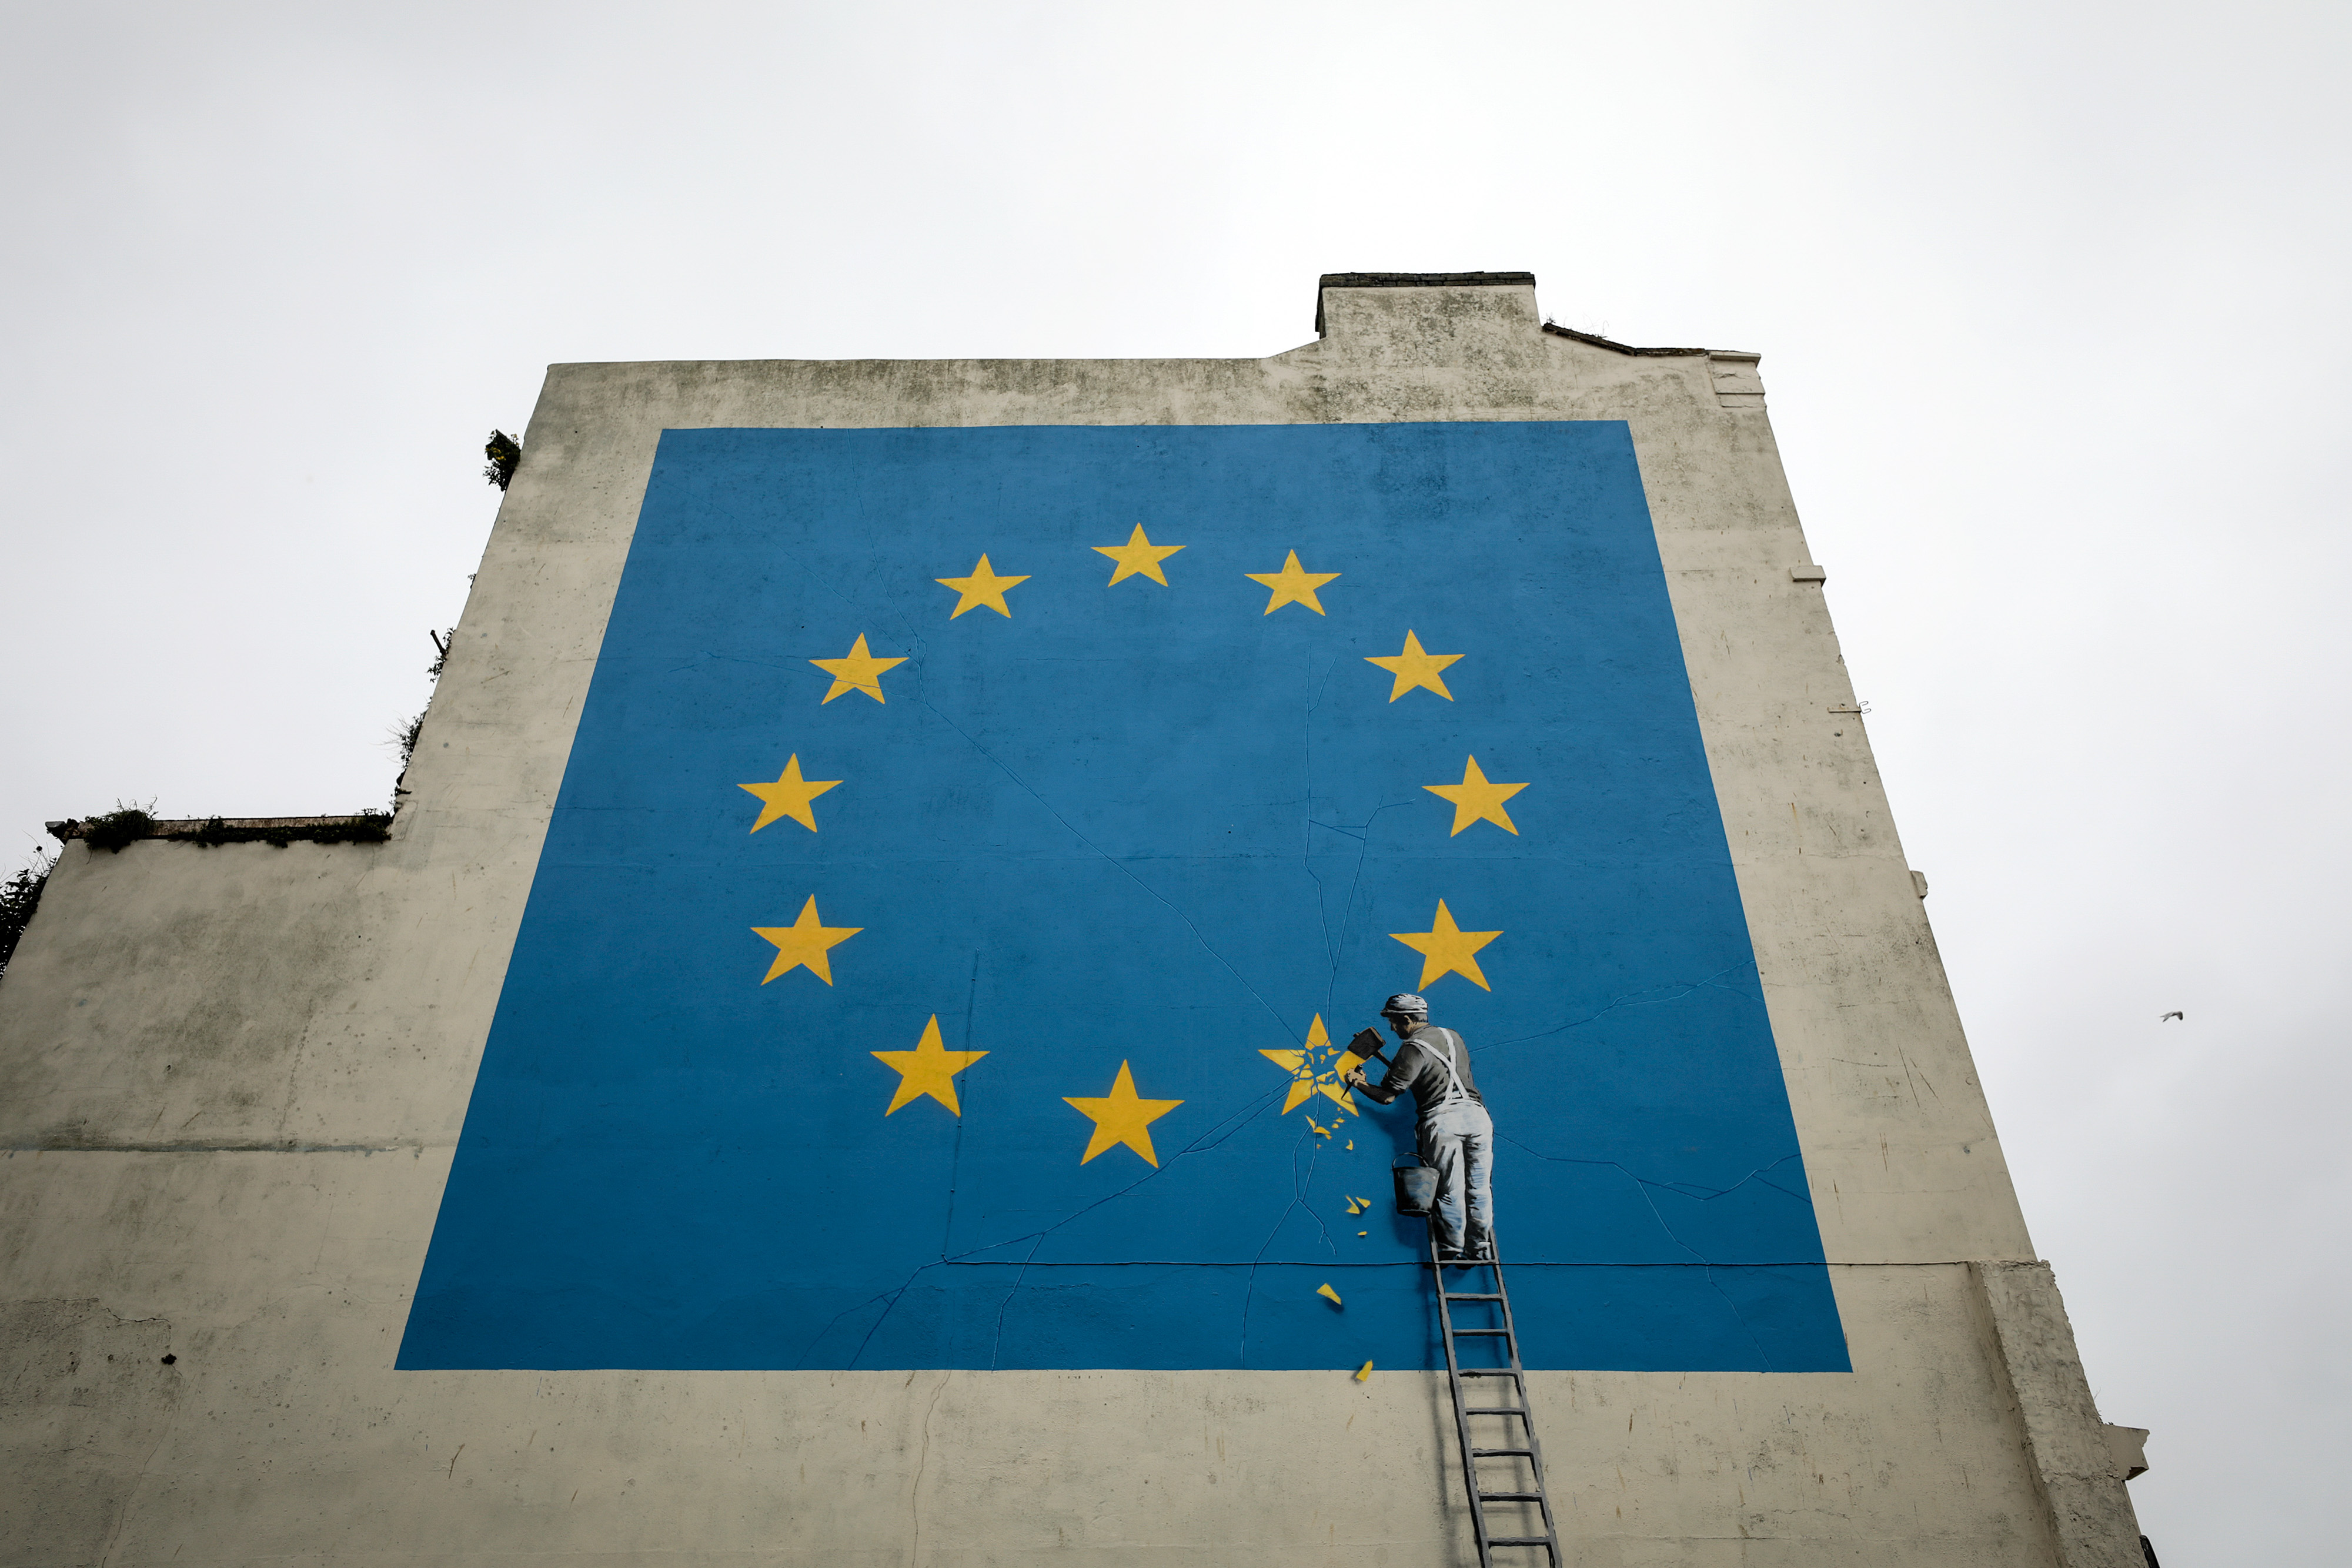 A mural depicting a European Union (EU) flag being chiseled by a workman sits on the side of a disused building near the ferry terminal in Dover, U.K., on Monday, May 8, 2017.